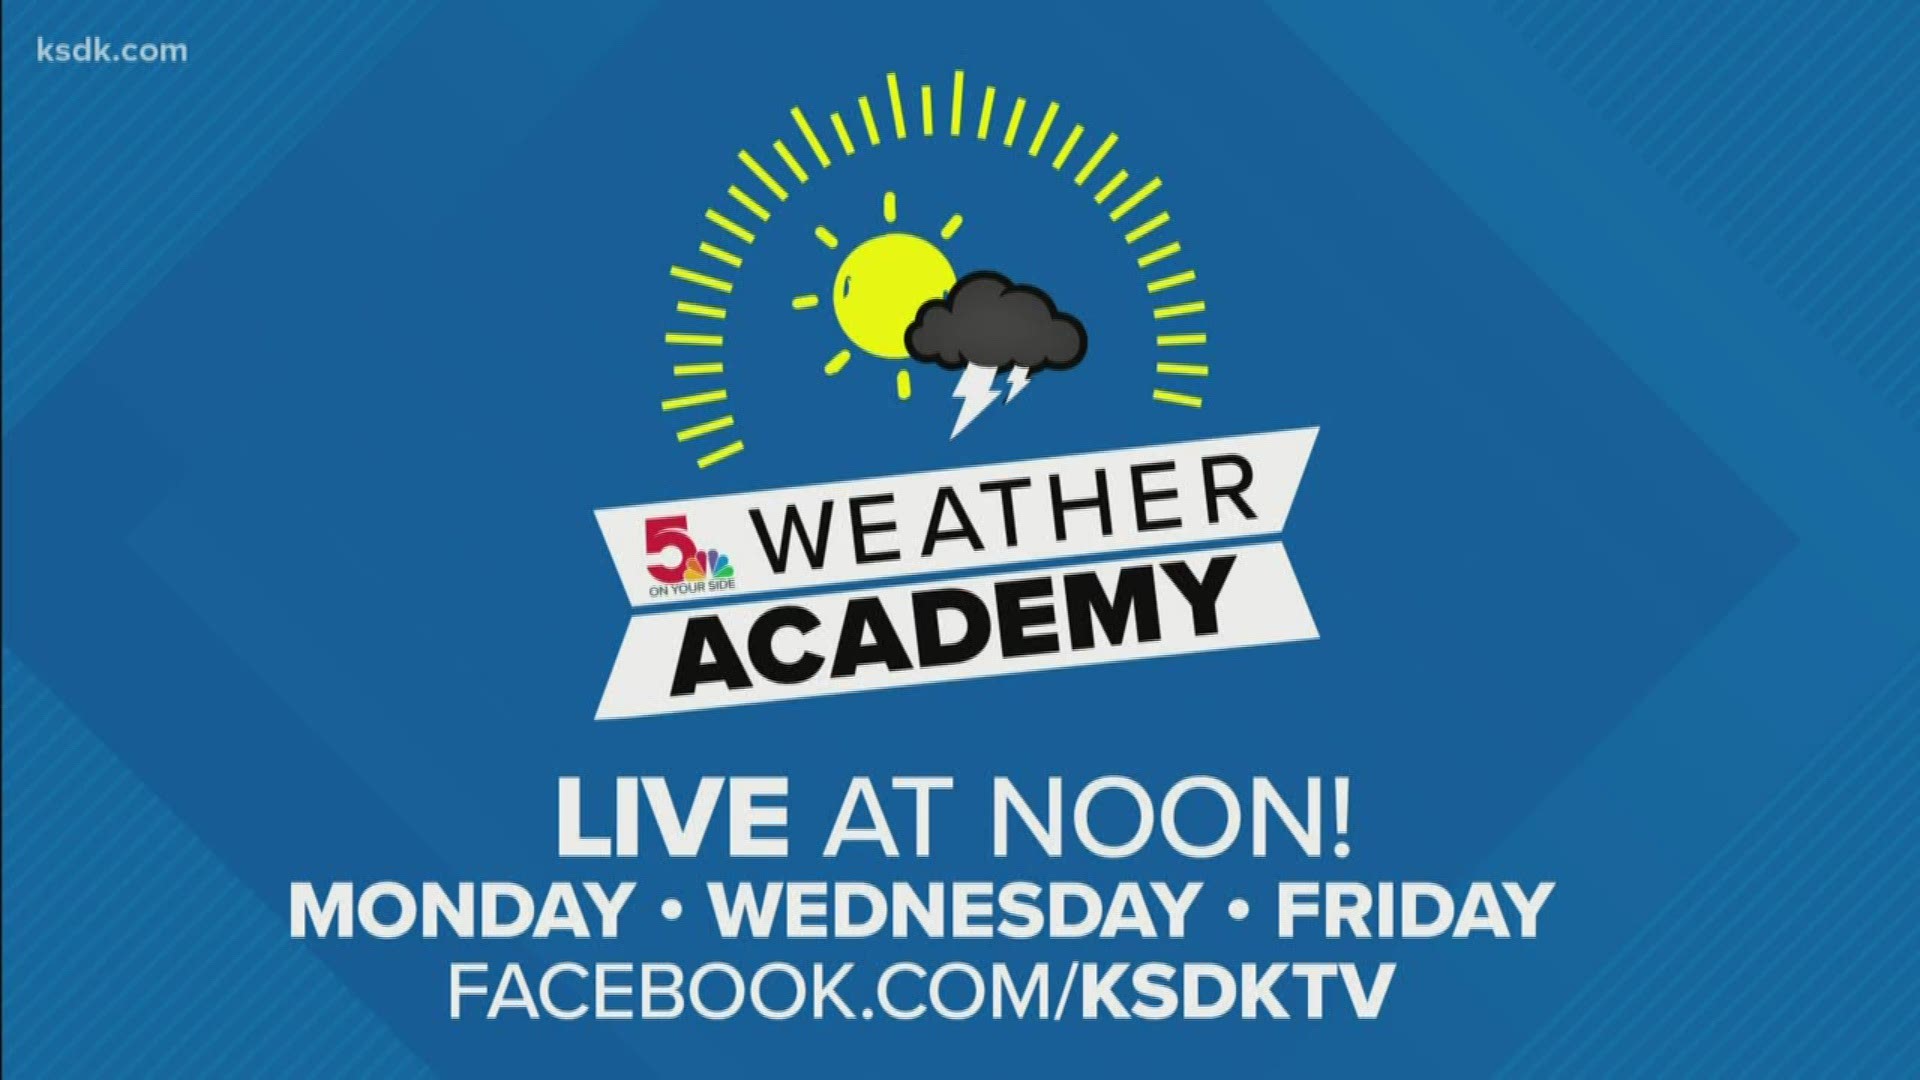 The digital Weather Academy begins on April 6